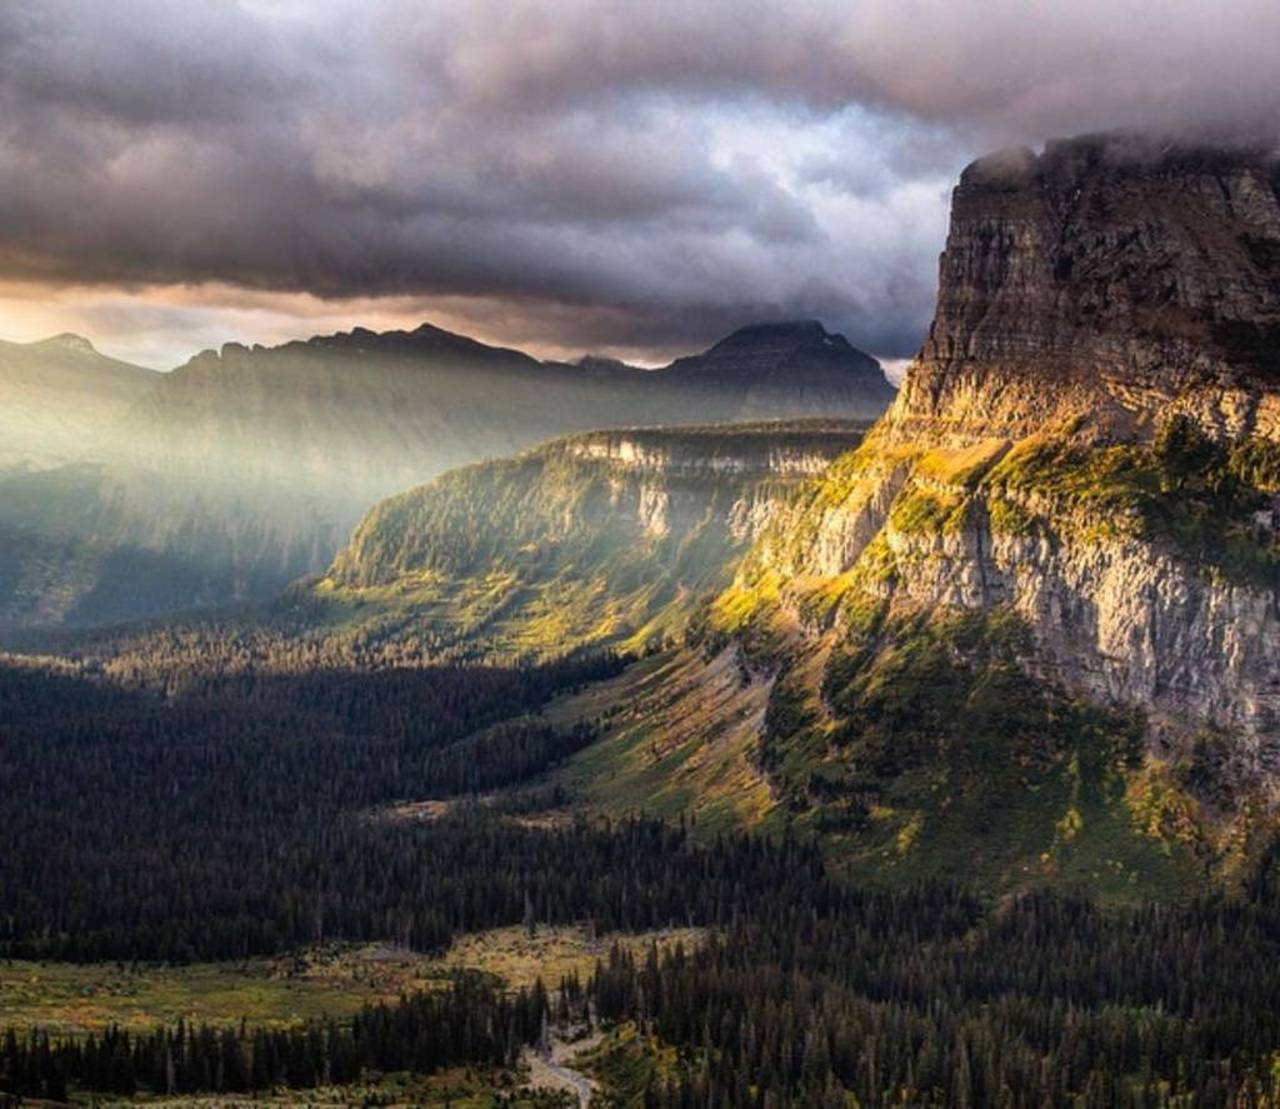 Going-To-The-Sun Road, Montanaby: @jacobwfrank#sunlight #hiking #natureaddict #landsca… http://ift.tt/1MPo2T2 https://t.co/tmcZ6x9maw